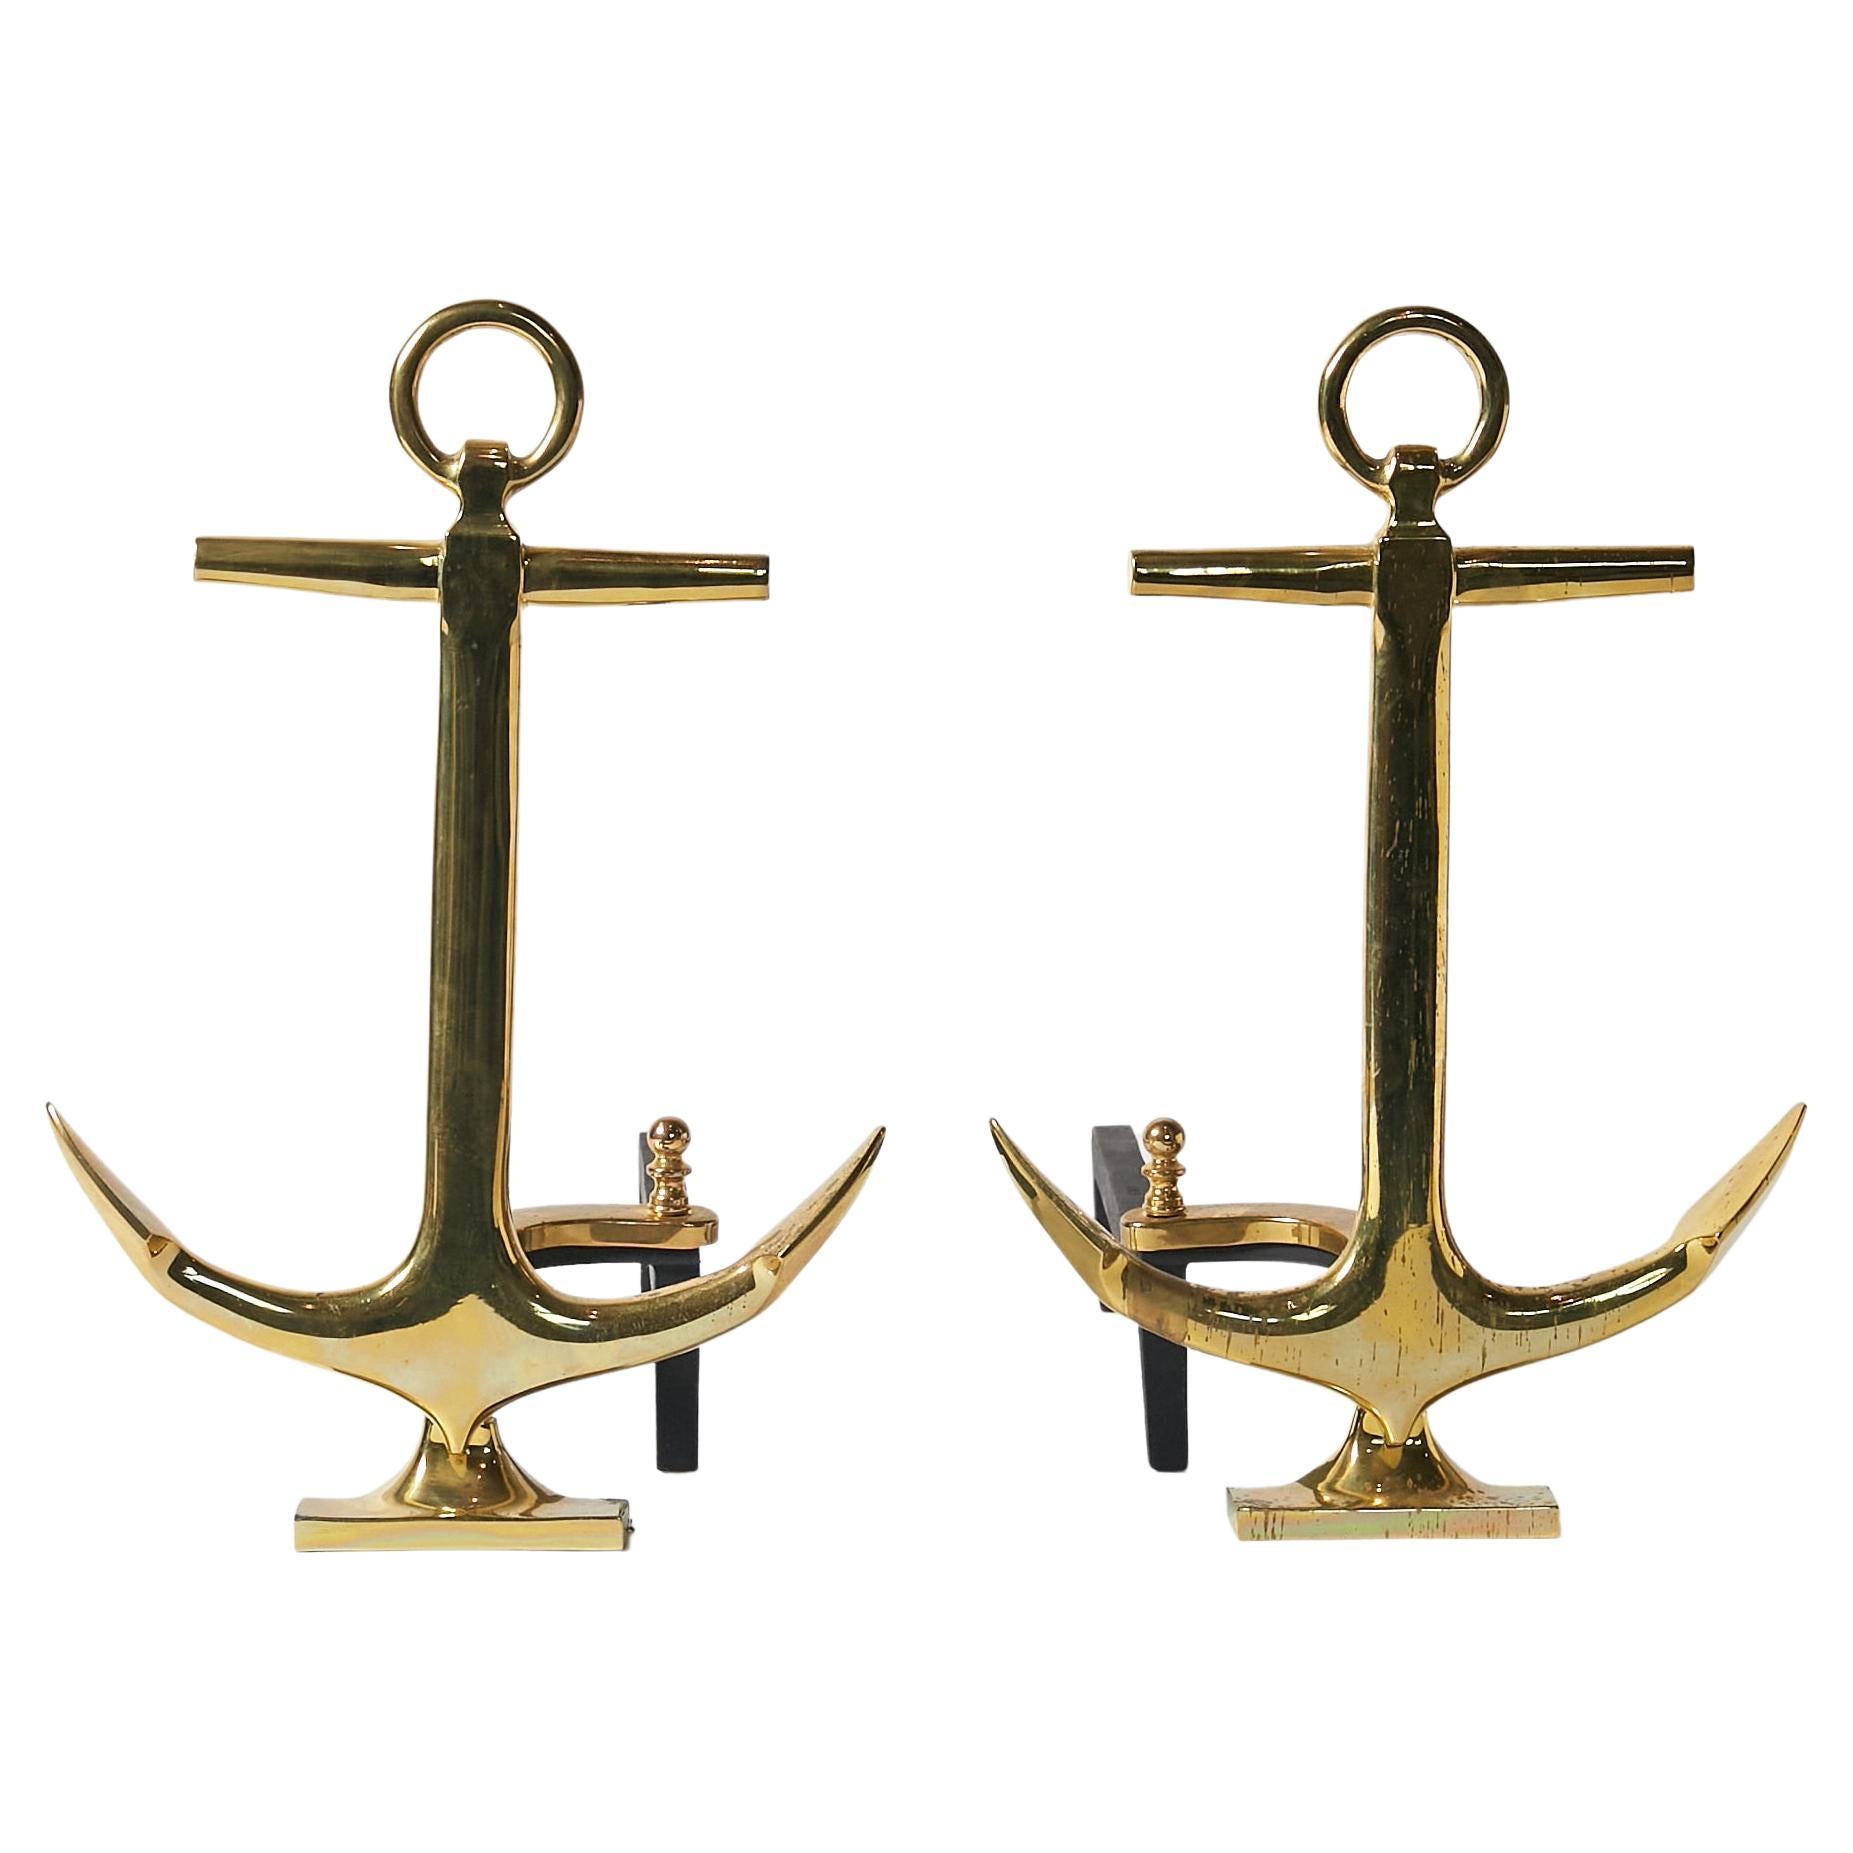 Pair of 1940 Anchor-Shaped Andirons in Polished Brass